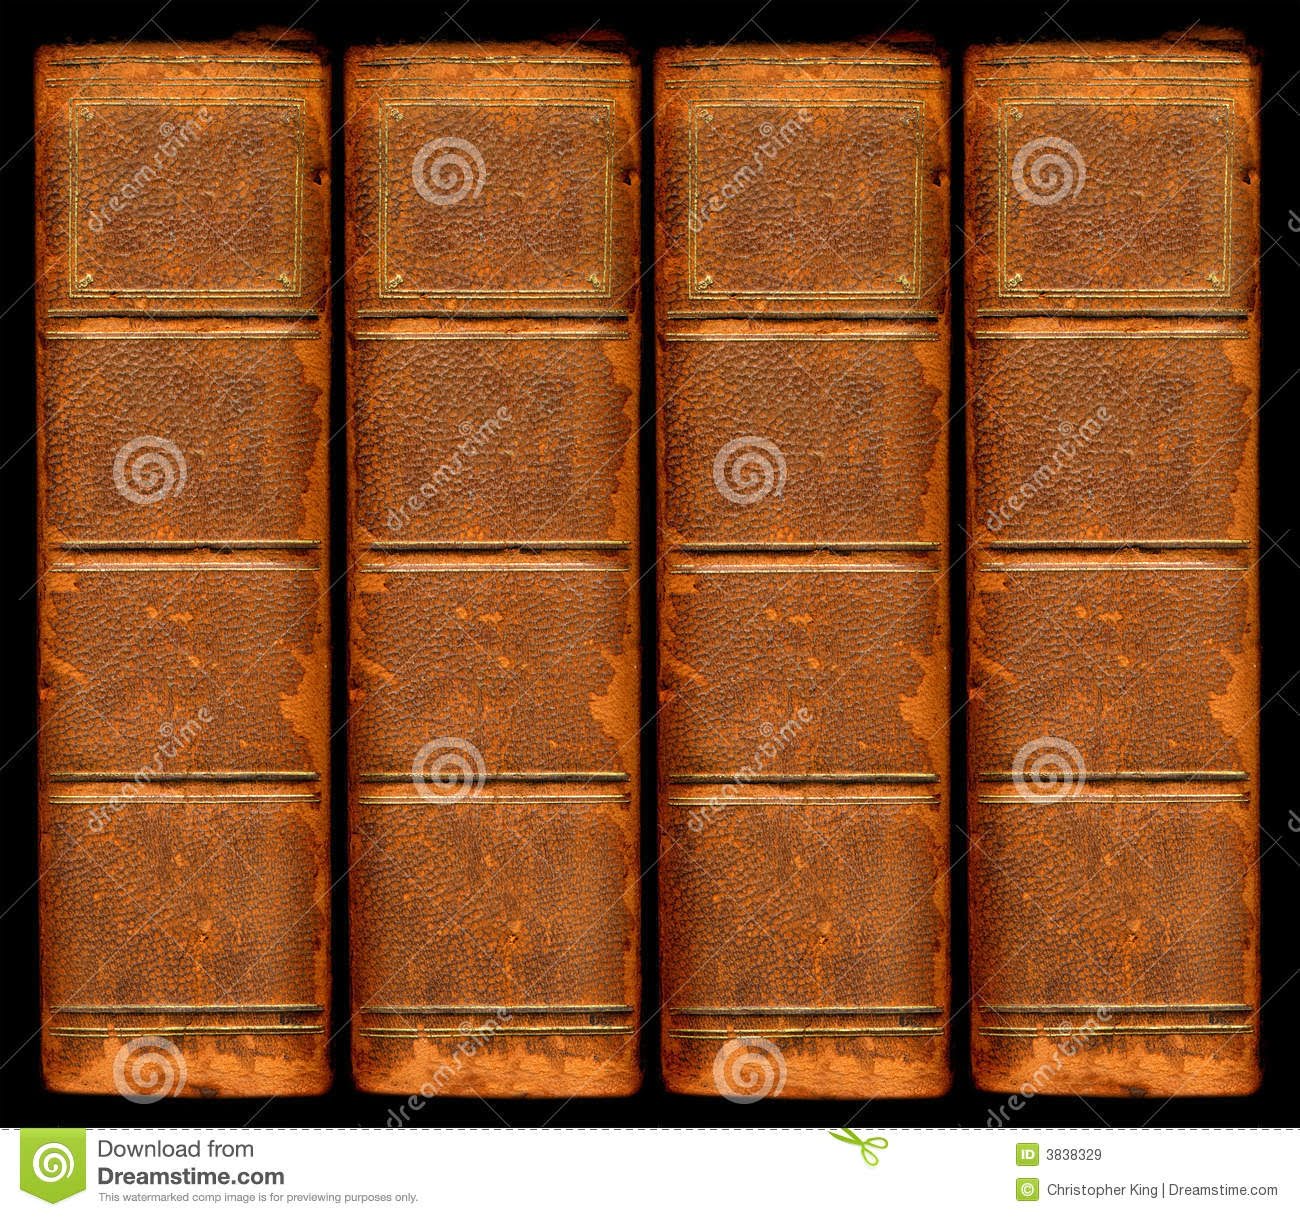 642 Book Spines Stock Photos Free Royalty Free Stock Photos From Dreamstime